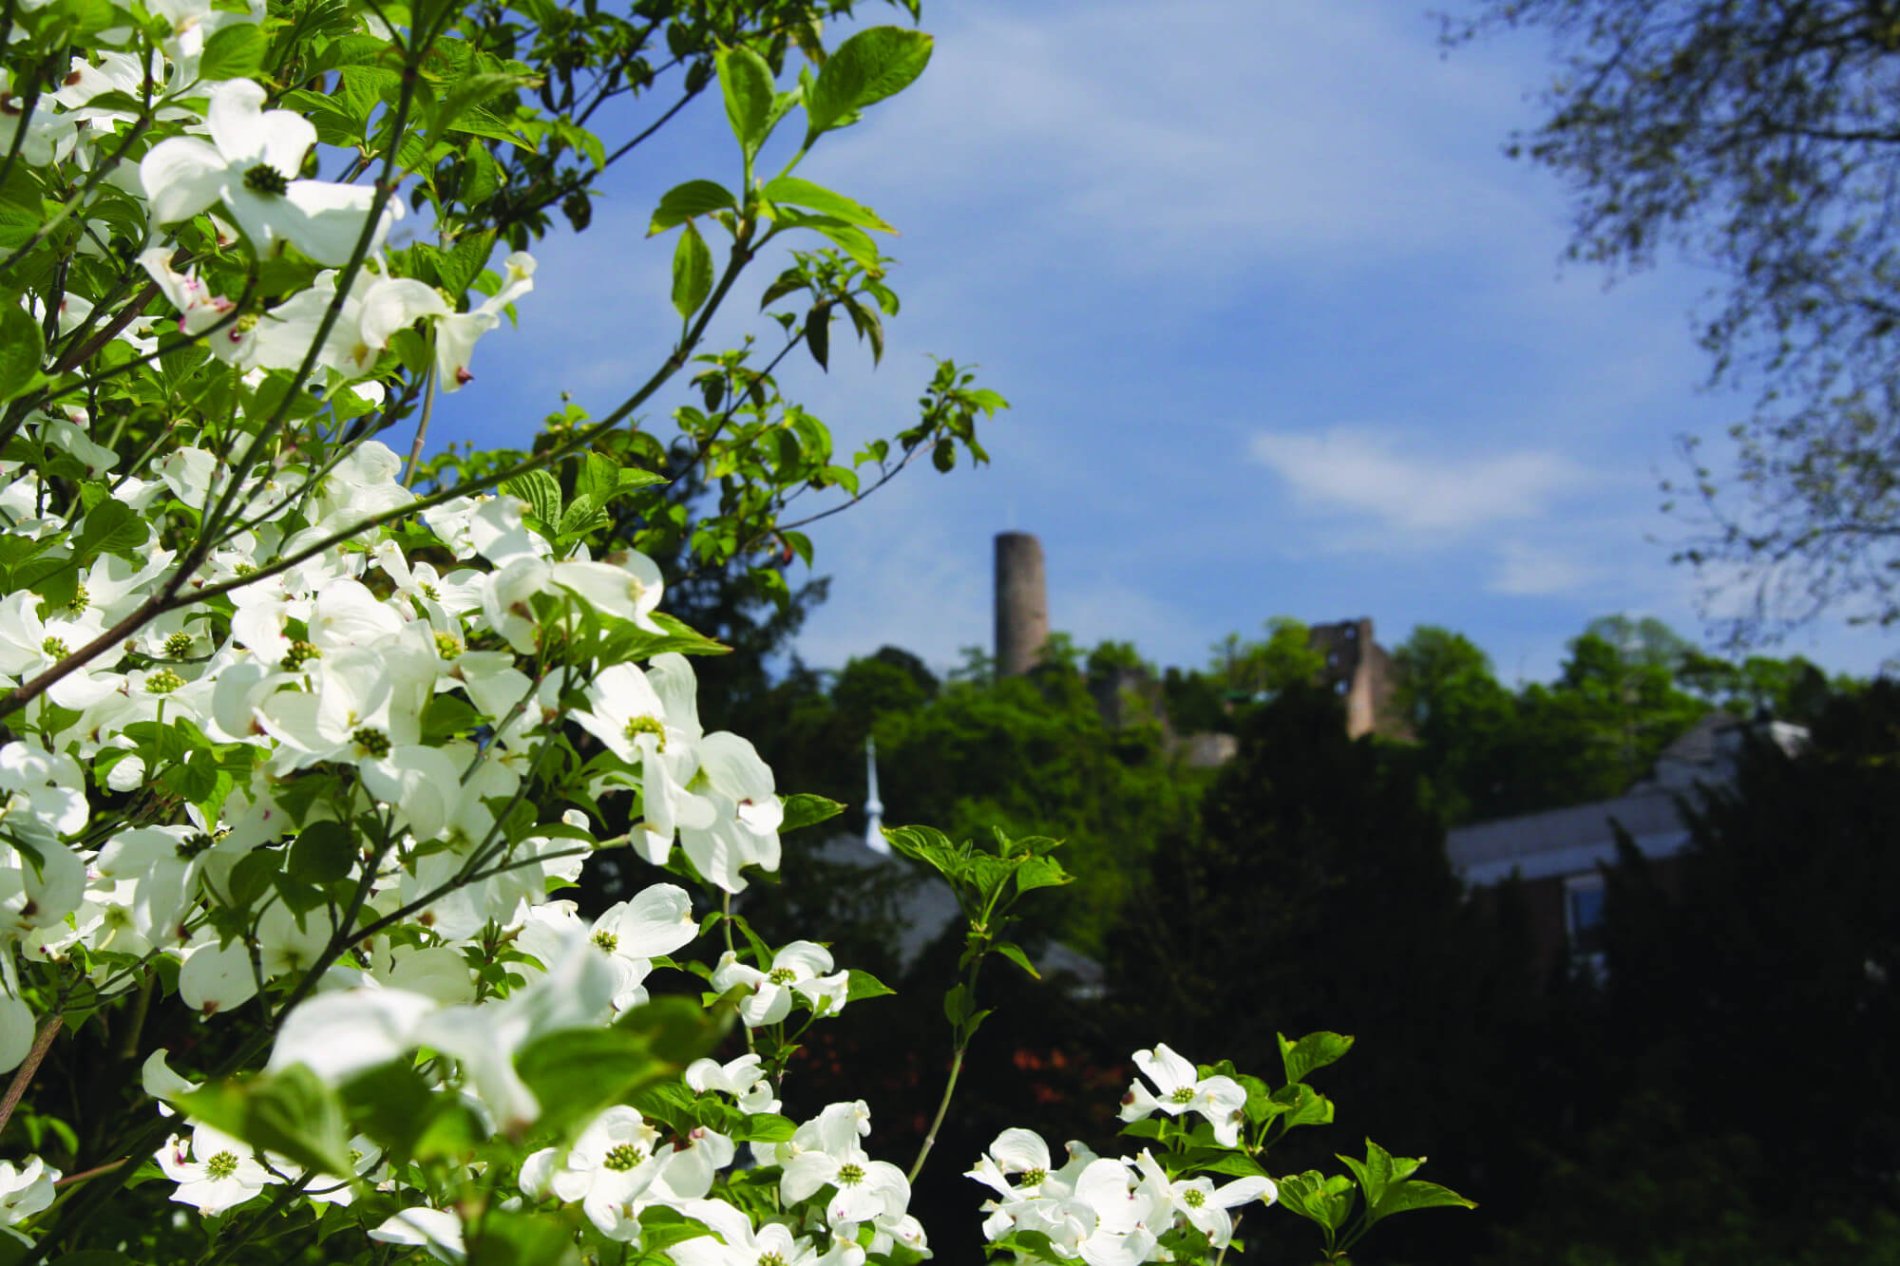 A white flowering bush in the foreground, the ruins of Windeck Castle can be seen blurred in the background.